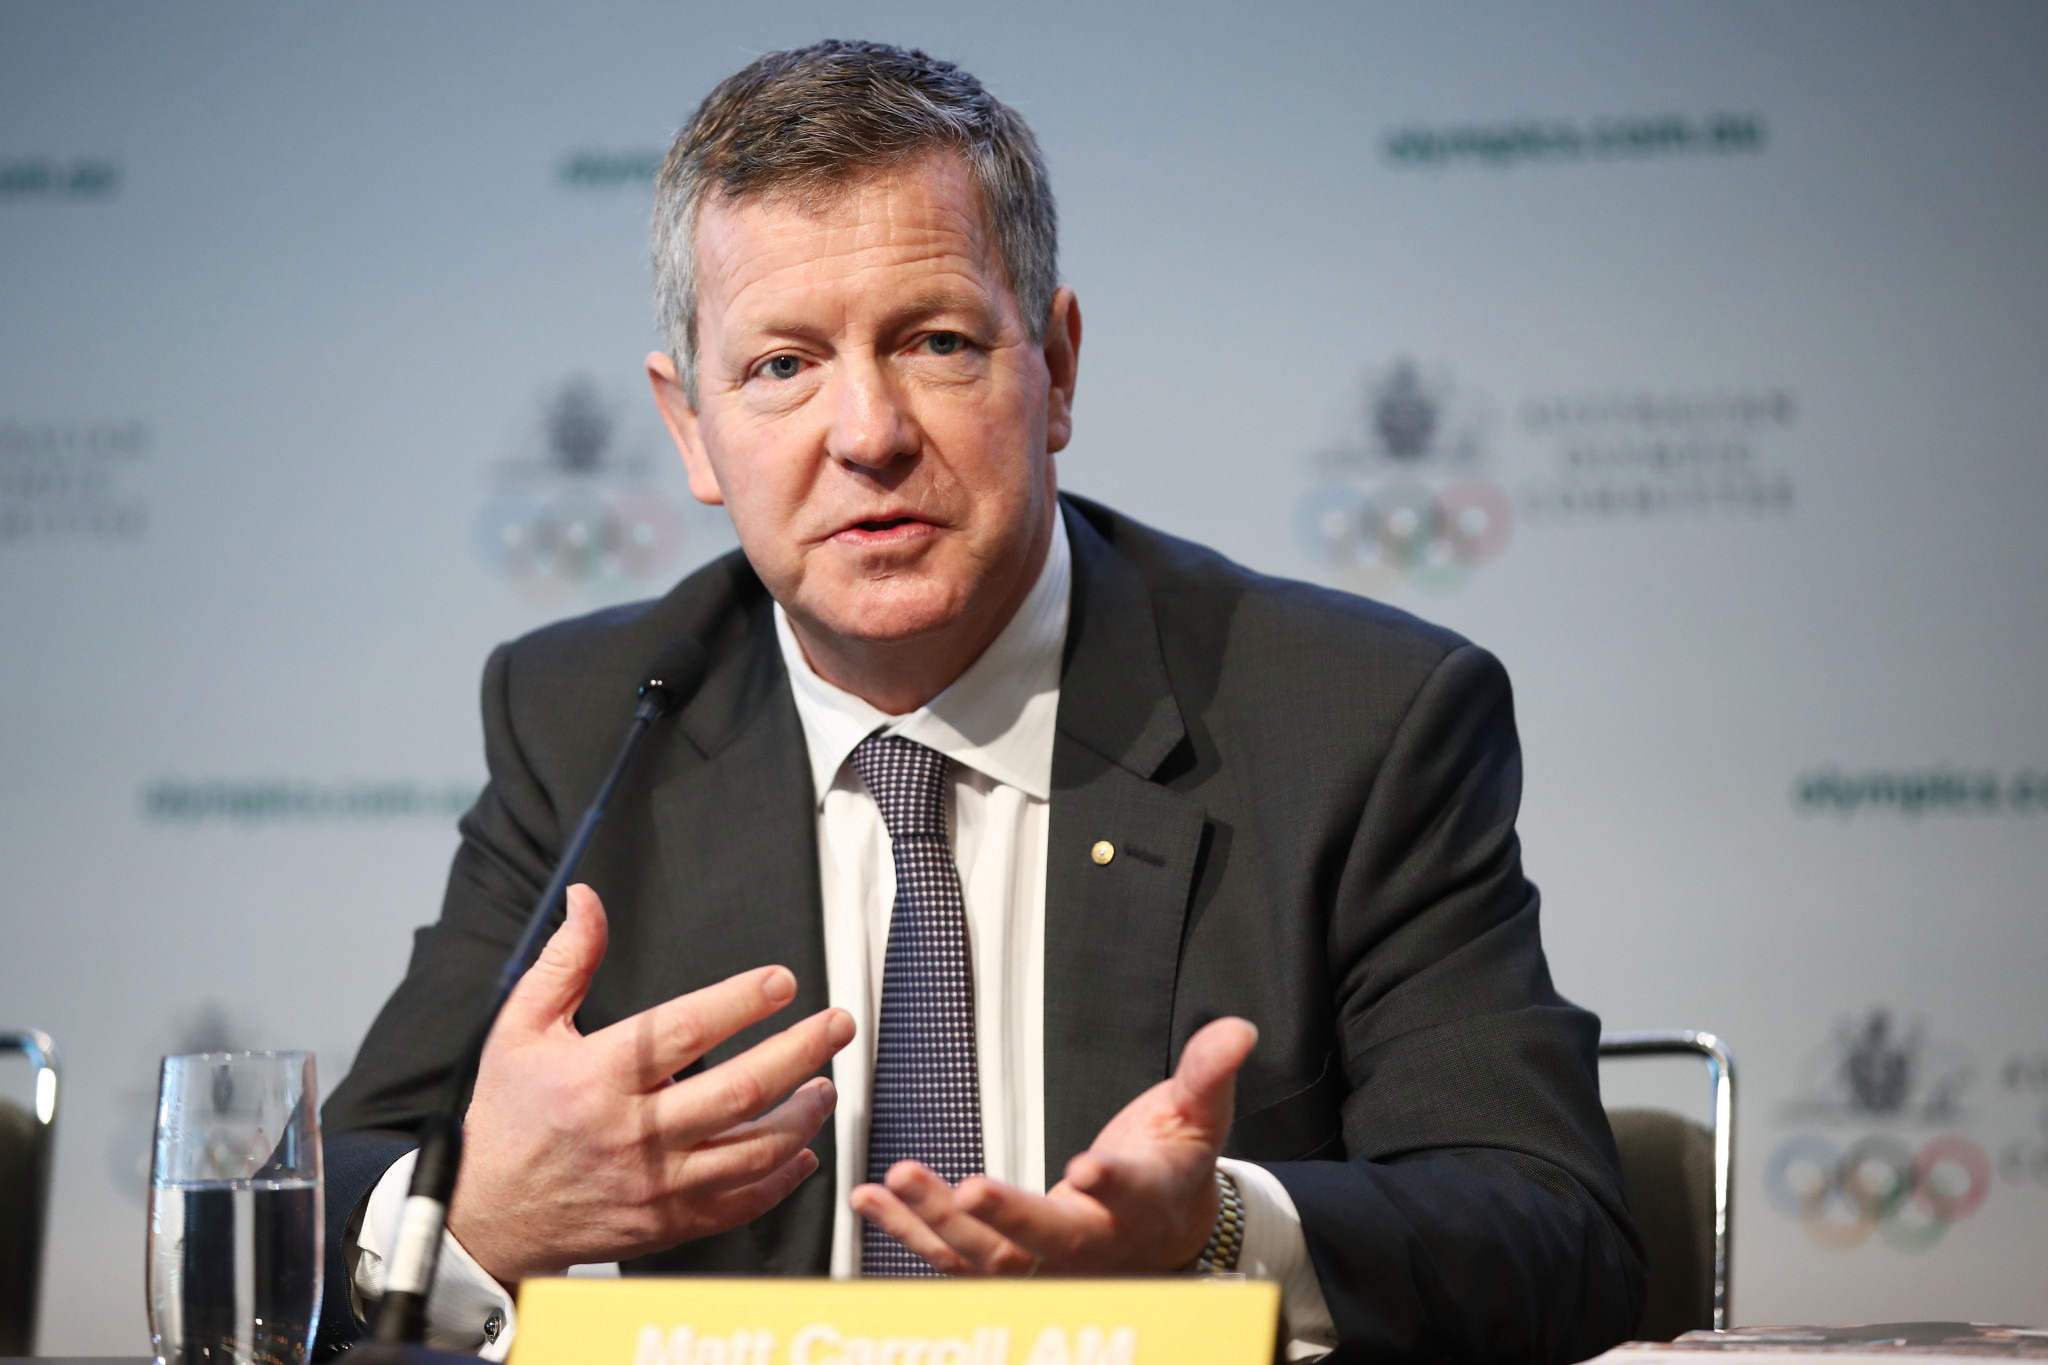 Australian Olympic Committee welcome selection of Gold Coast as SportAccord Summit host